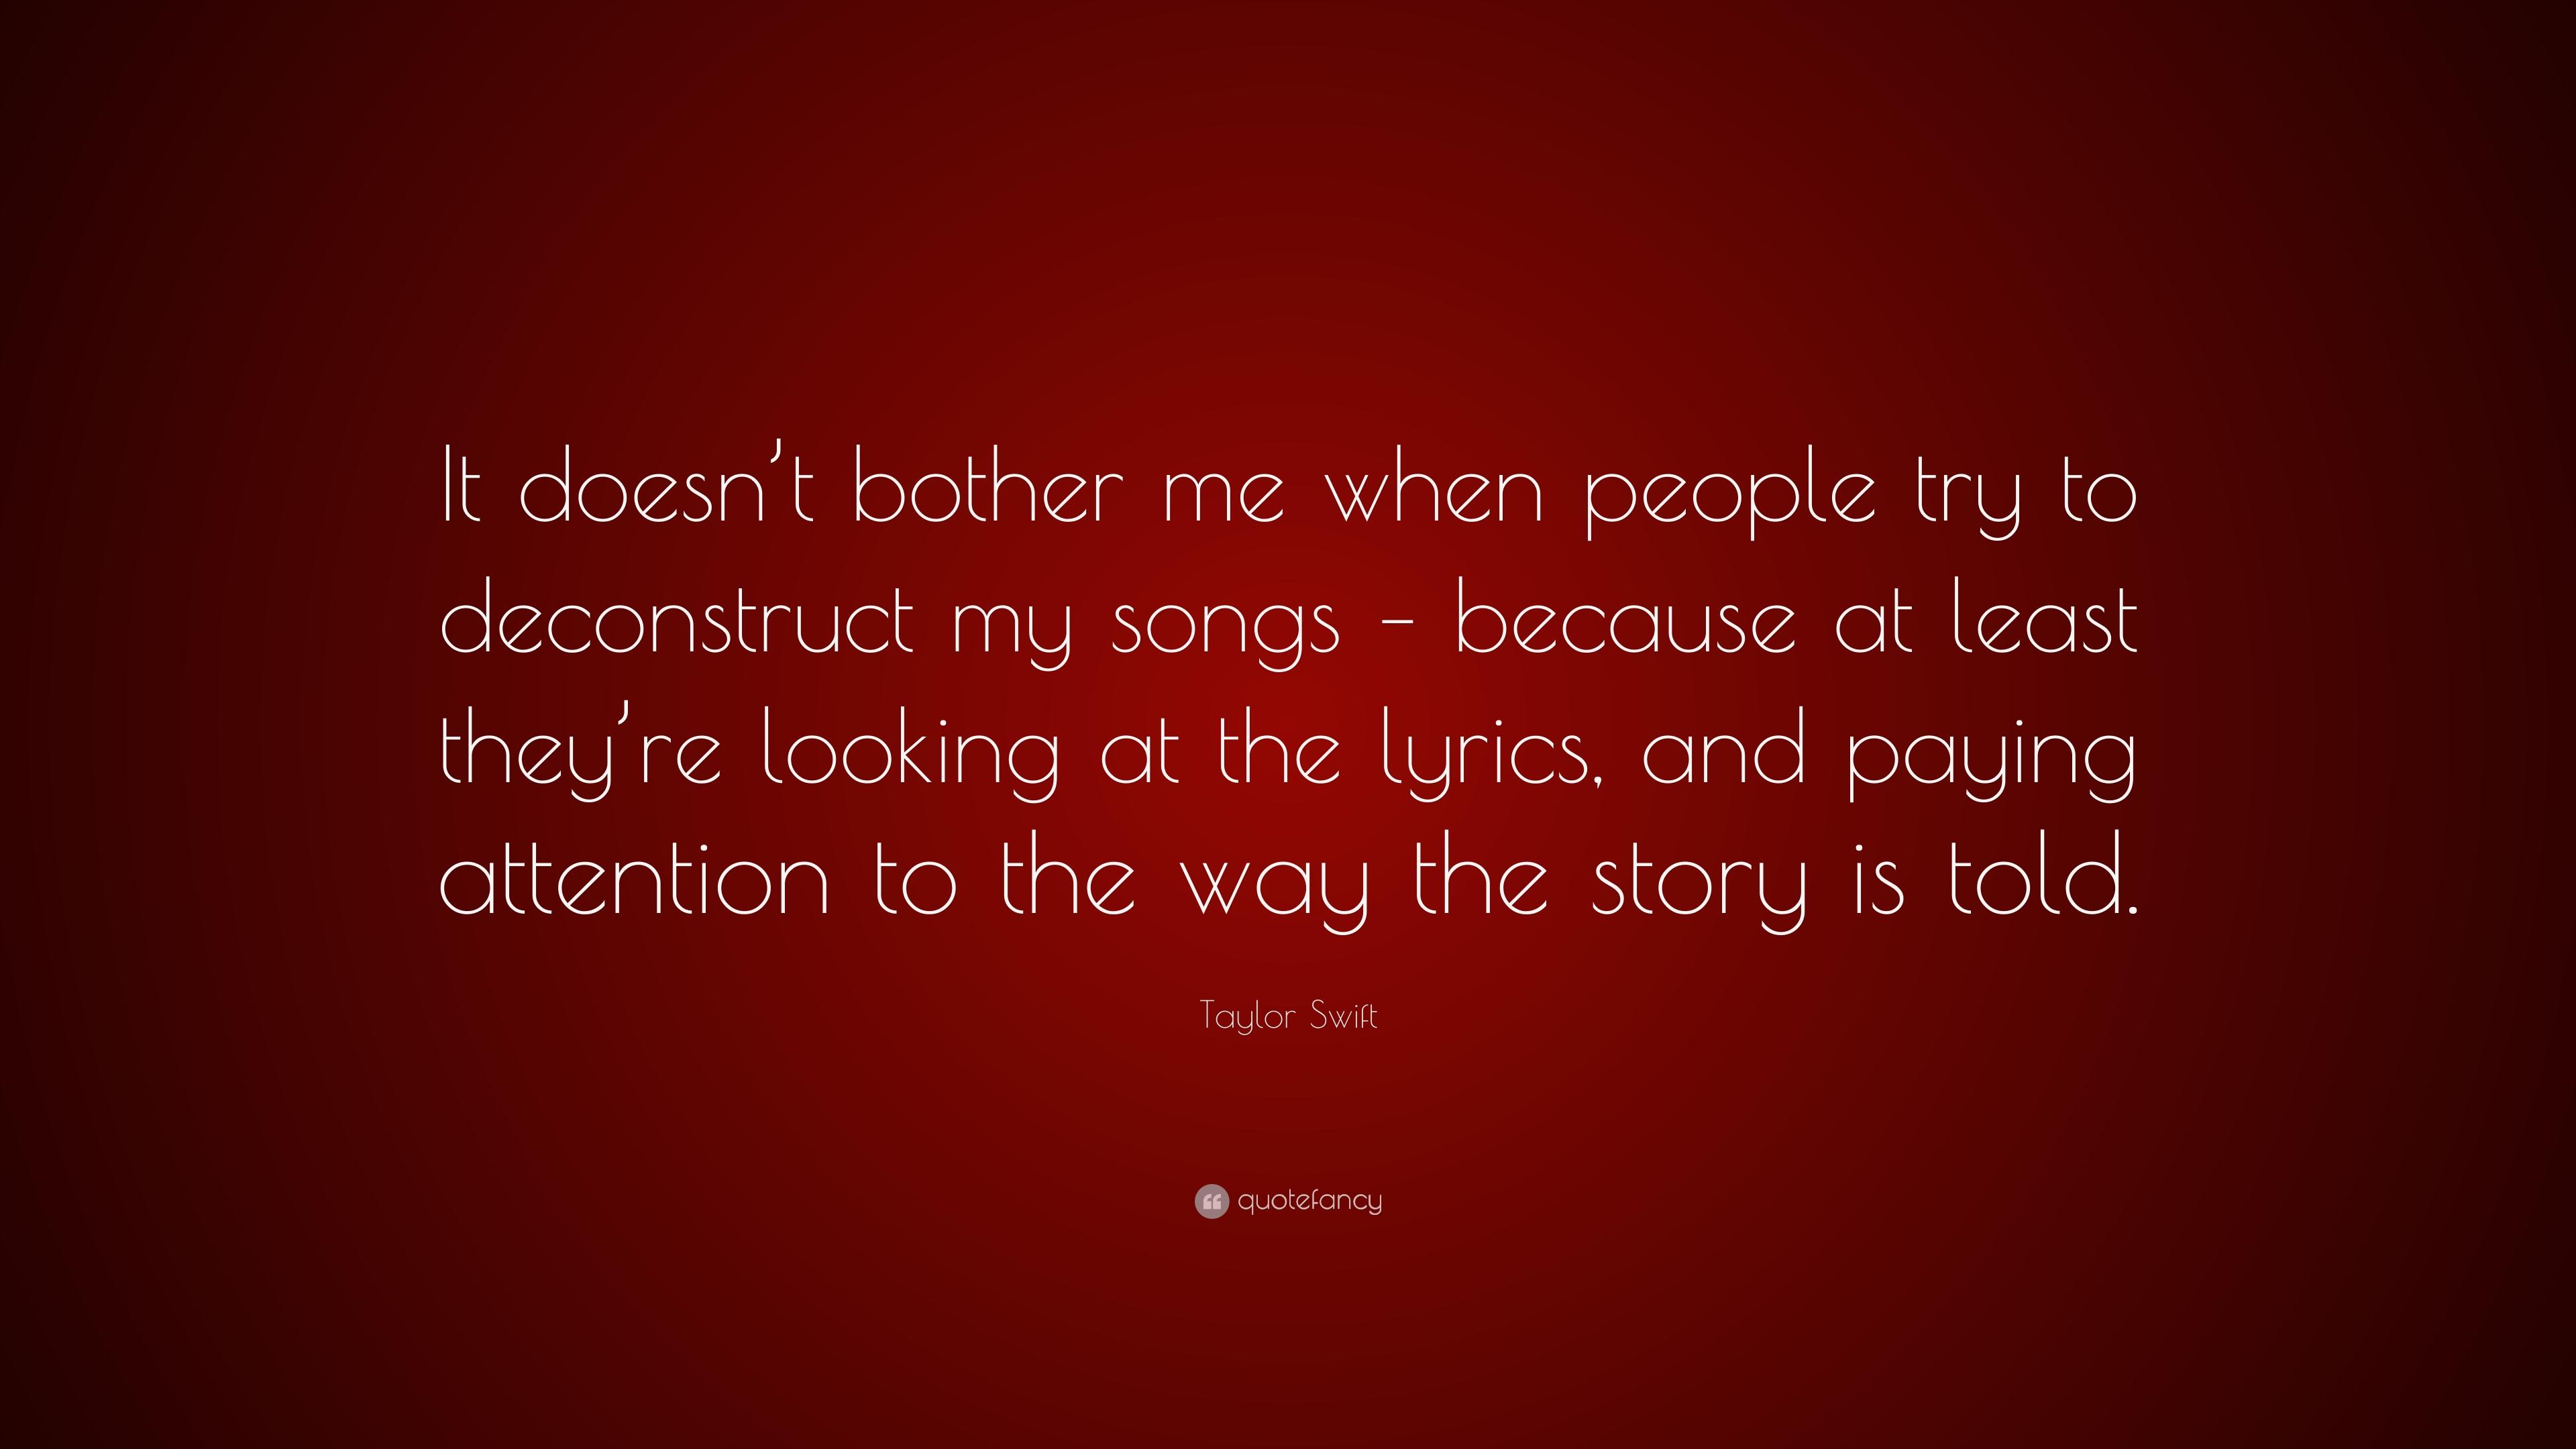 Taylor Swift Quote: “It doesn't bother me when people try to